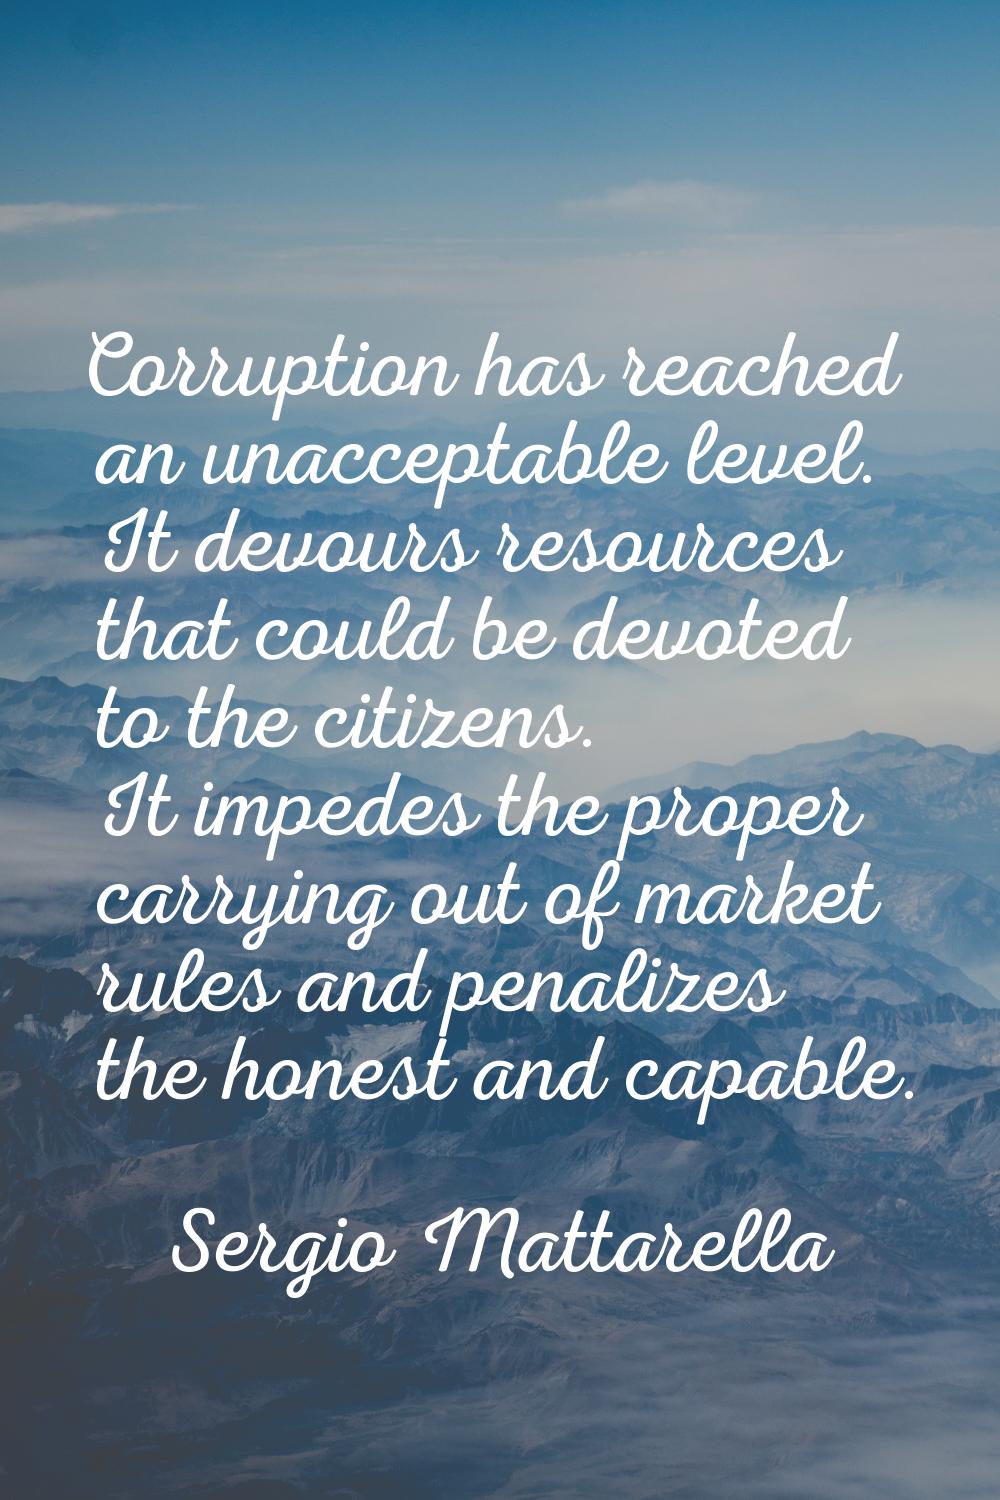 Corruption has reached an unacceptable level. It devours resources that could be devoted to the cit